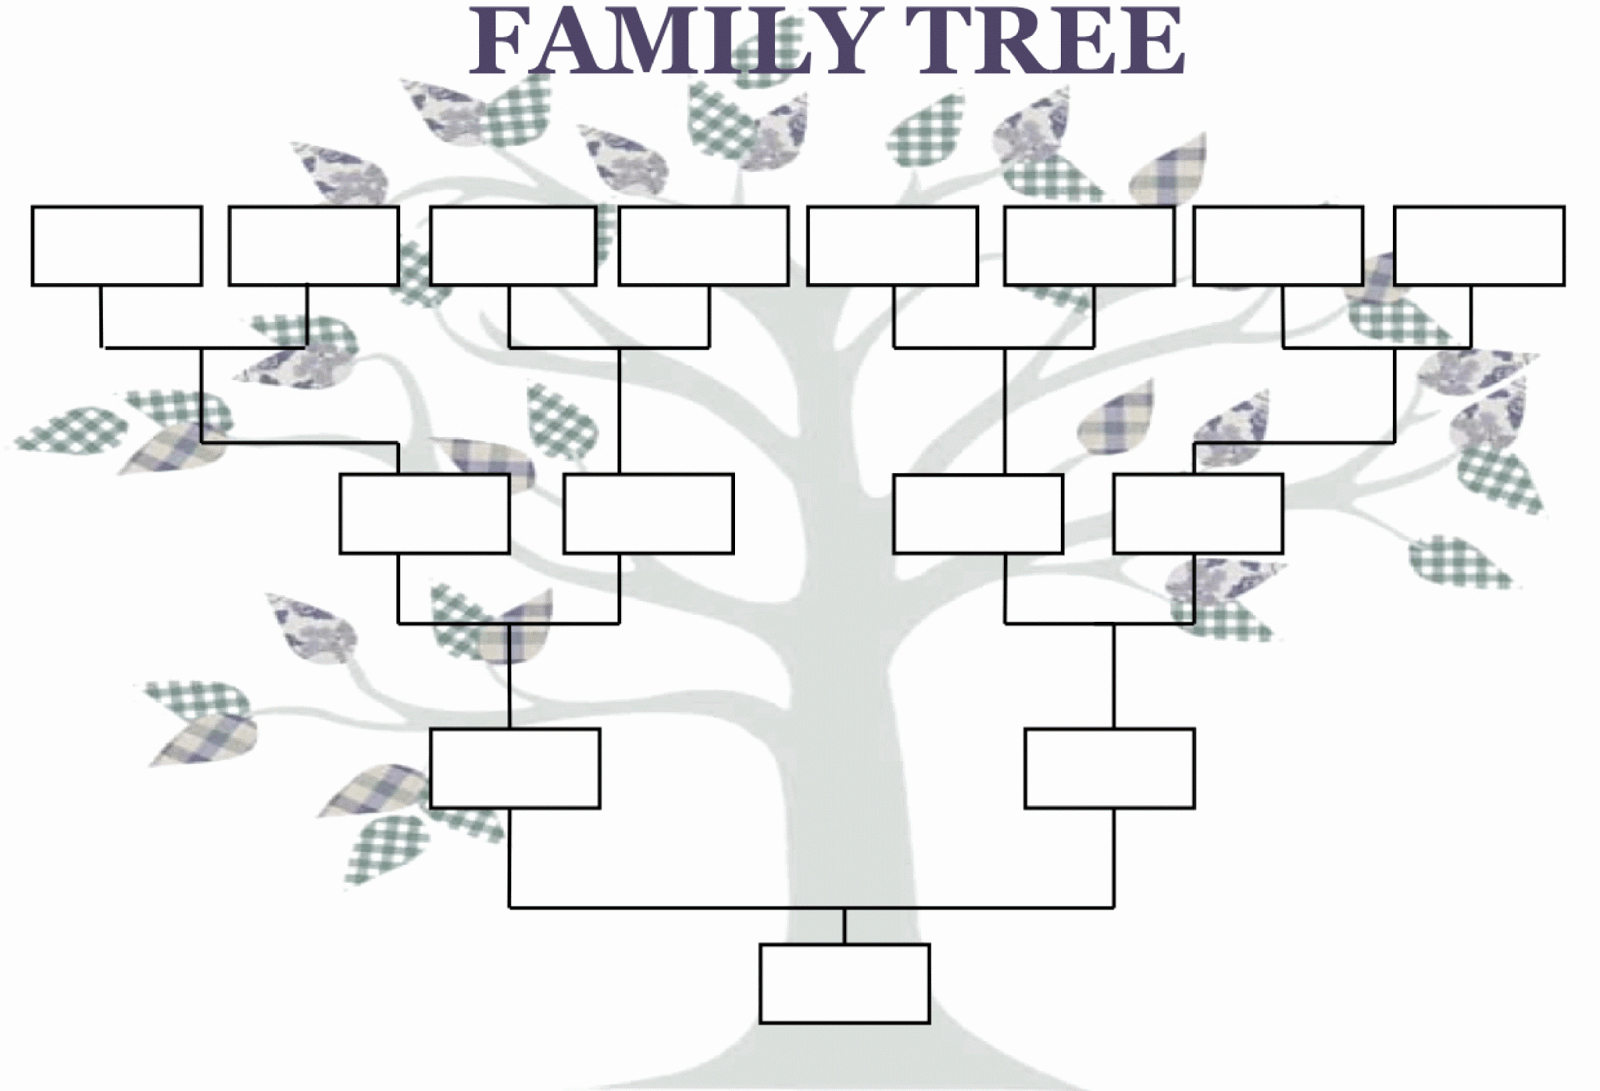 4 Generation Family Tree Templates Inspirational Biggest 13 Million Person Family Tree Tells Much About